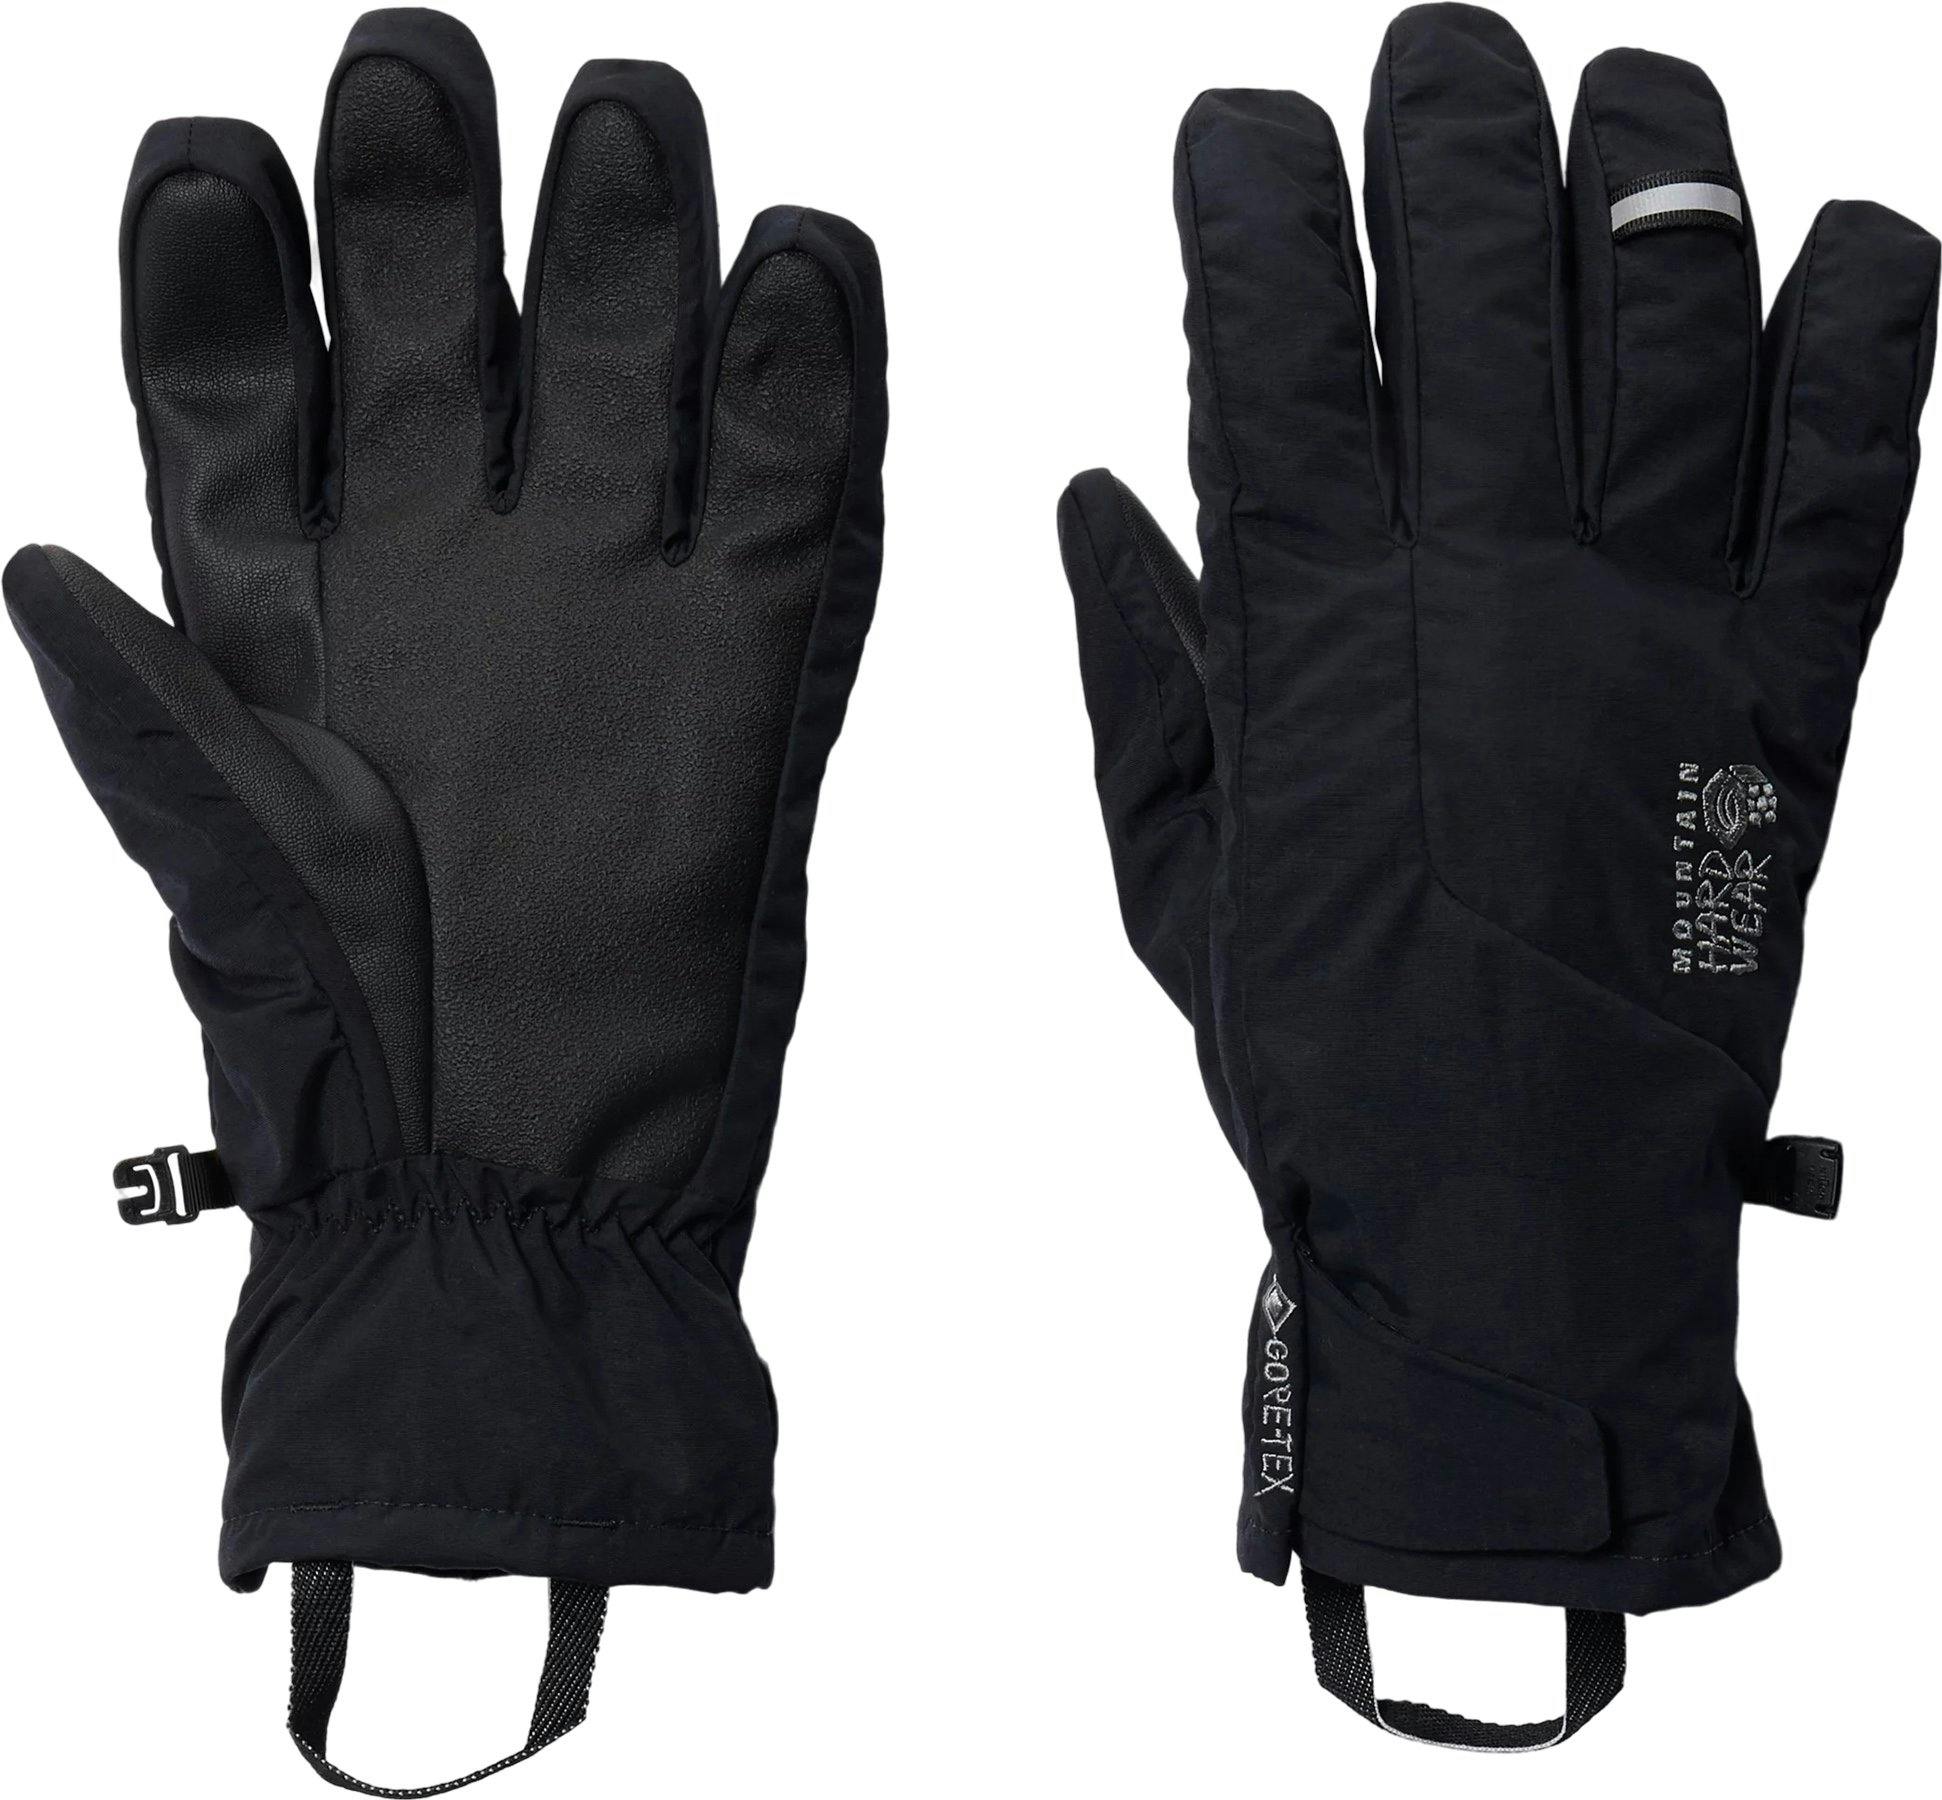 Product image for Cloud Shadow GORE-TEX Gloves - Unisex